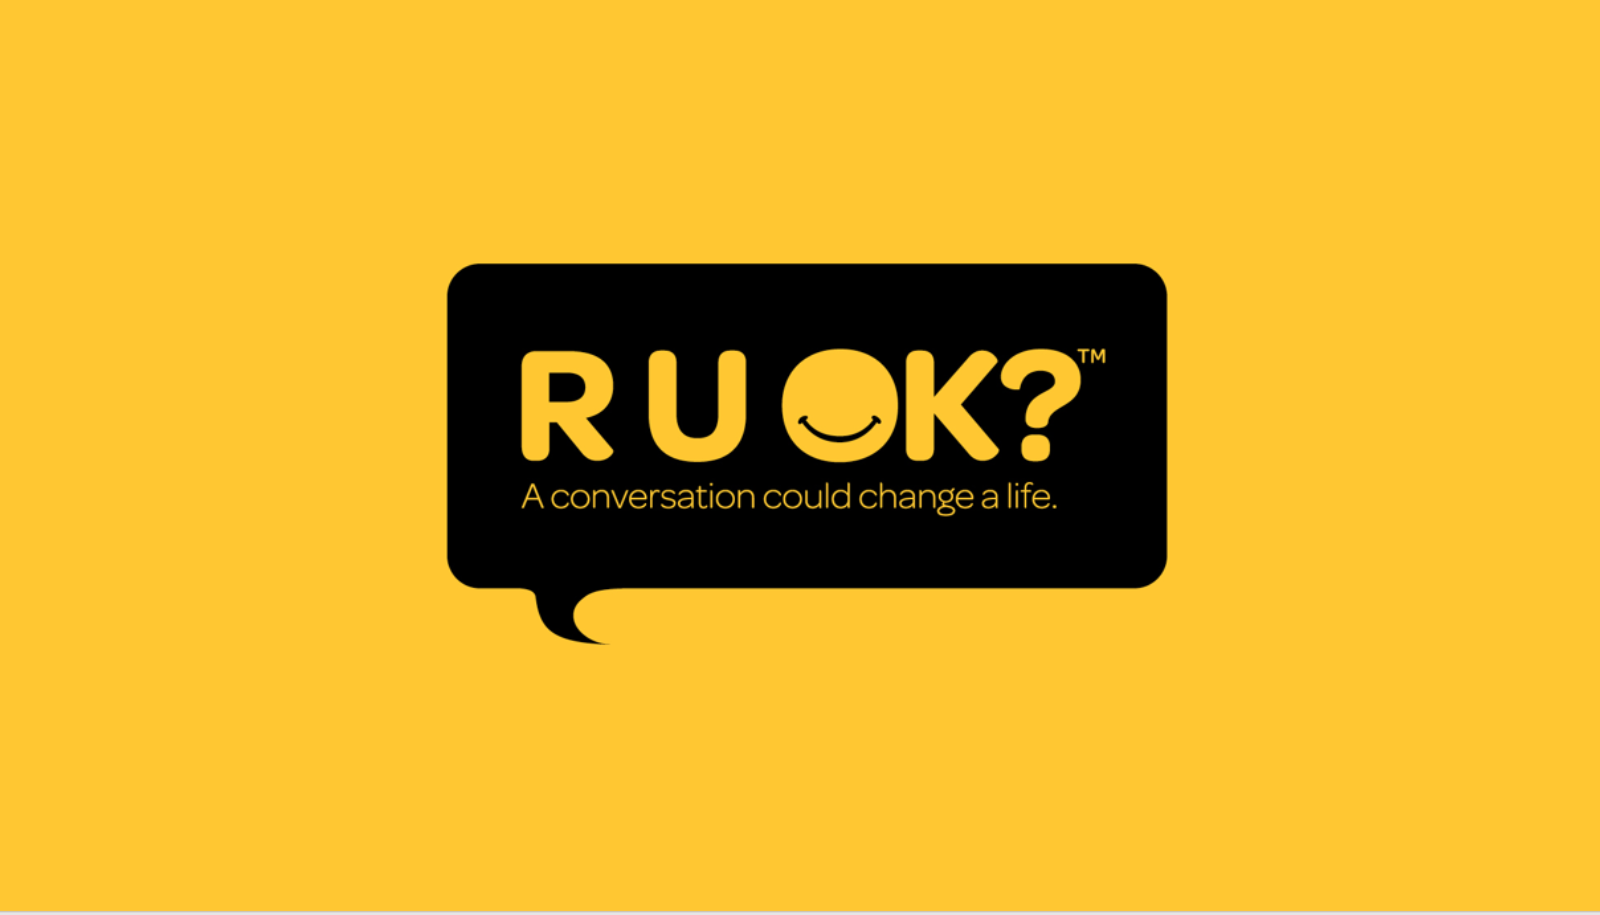 A black rectangular sign with text "R U OK? A conversation could change a life." and a yellow background.